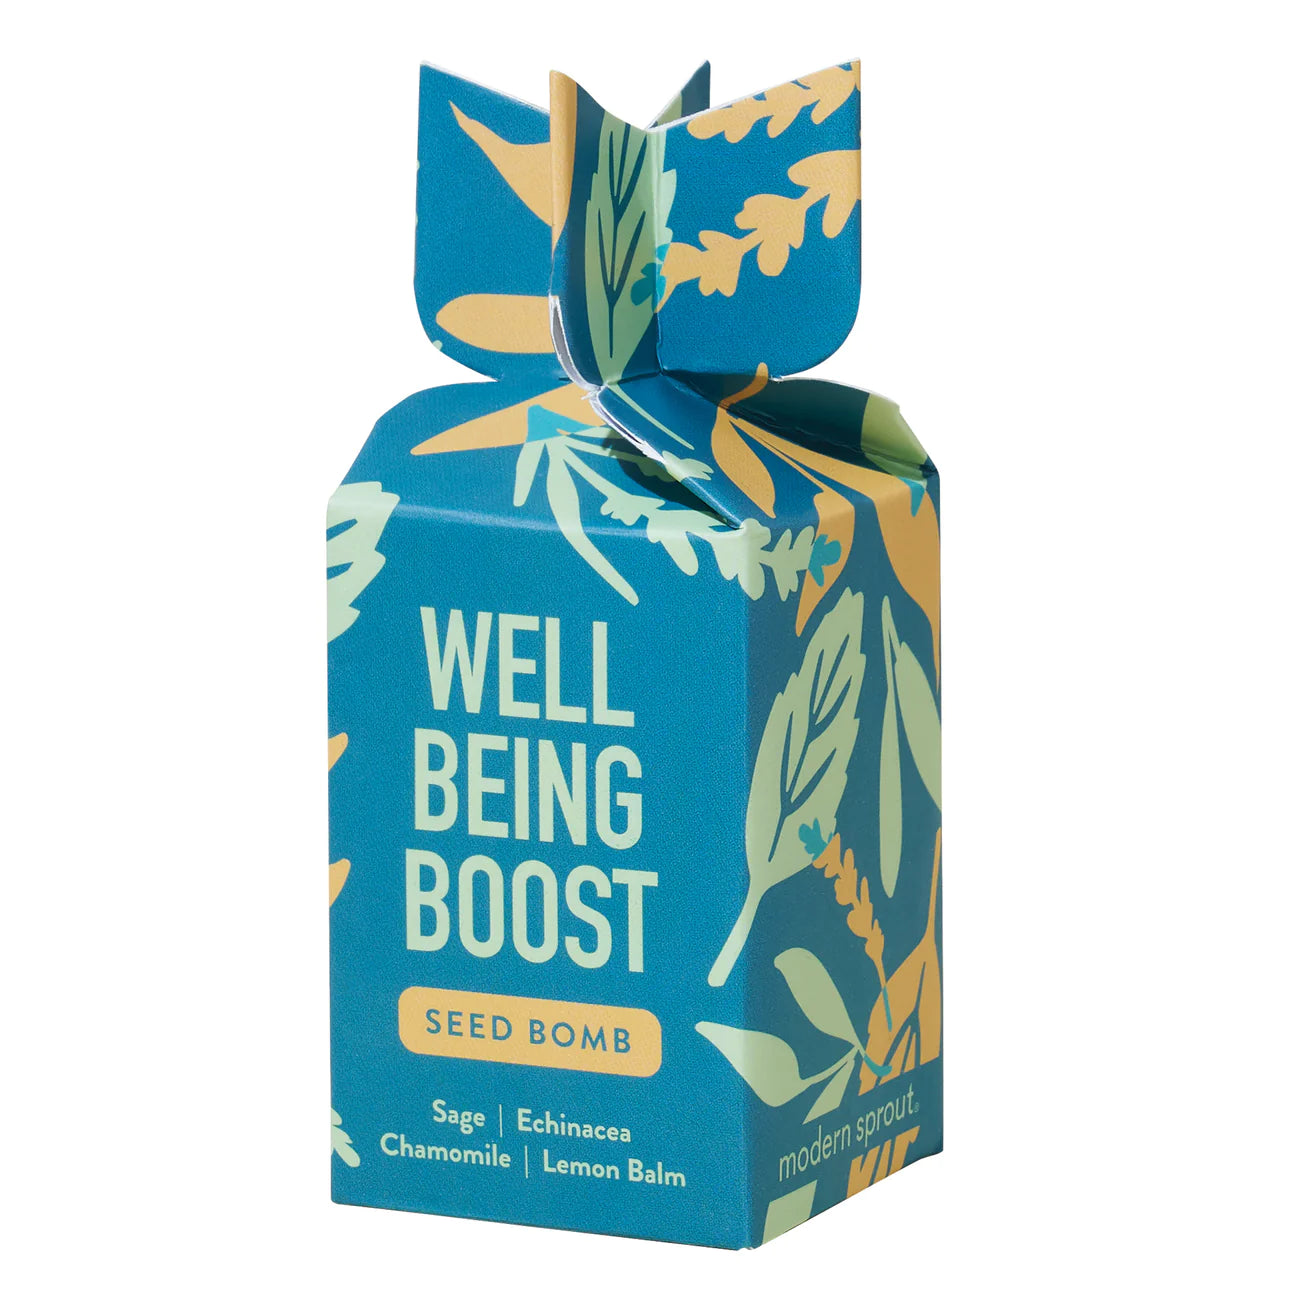 Well Being Boost Seed Bomb